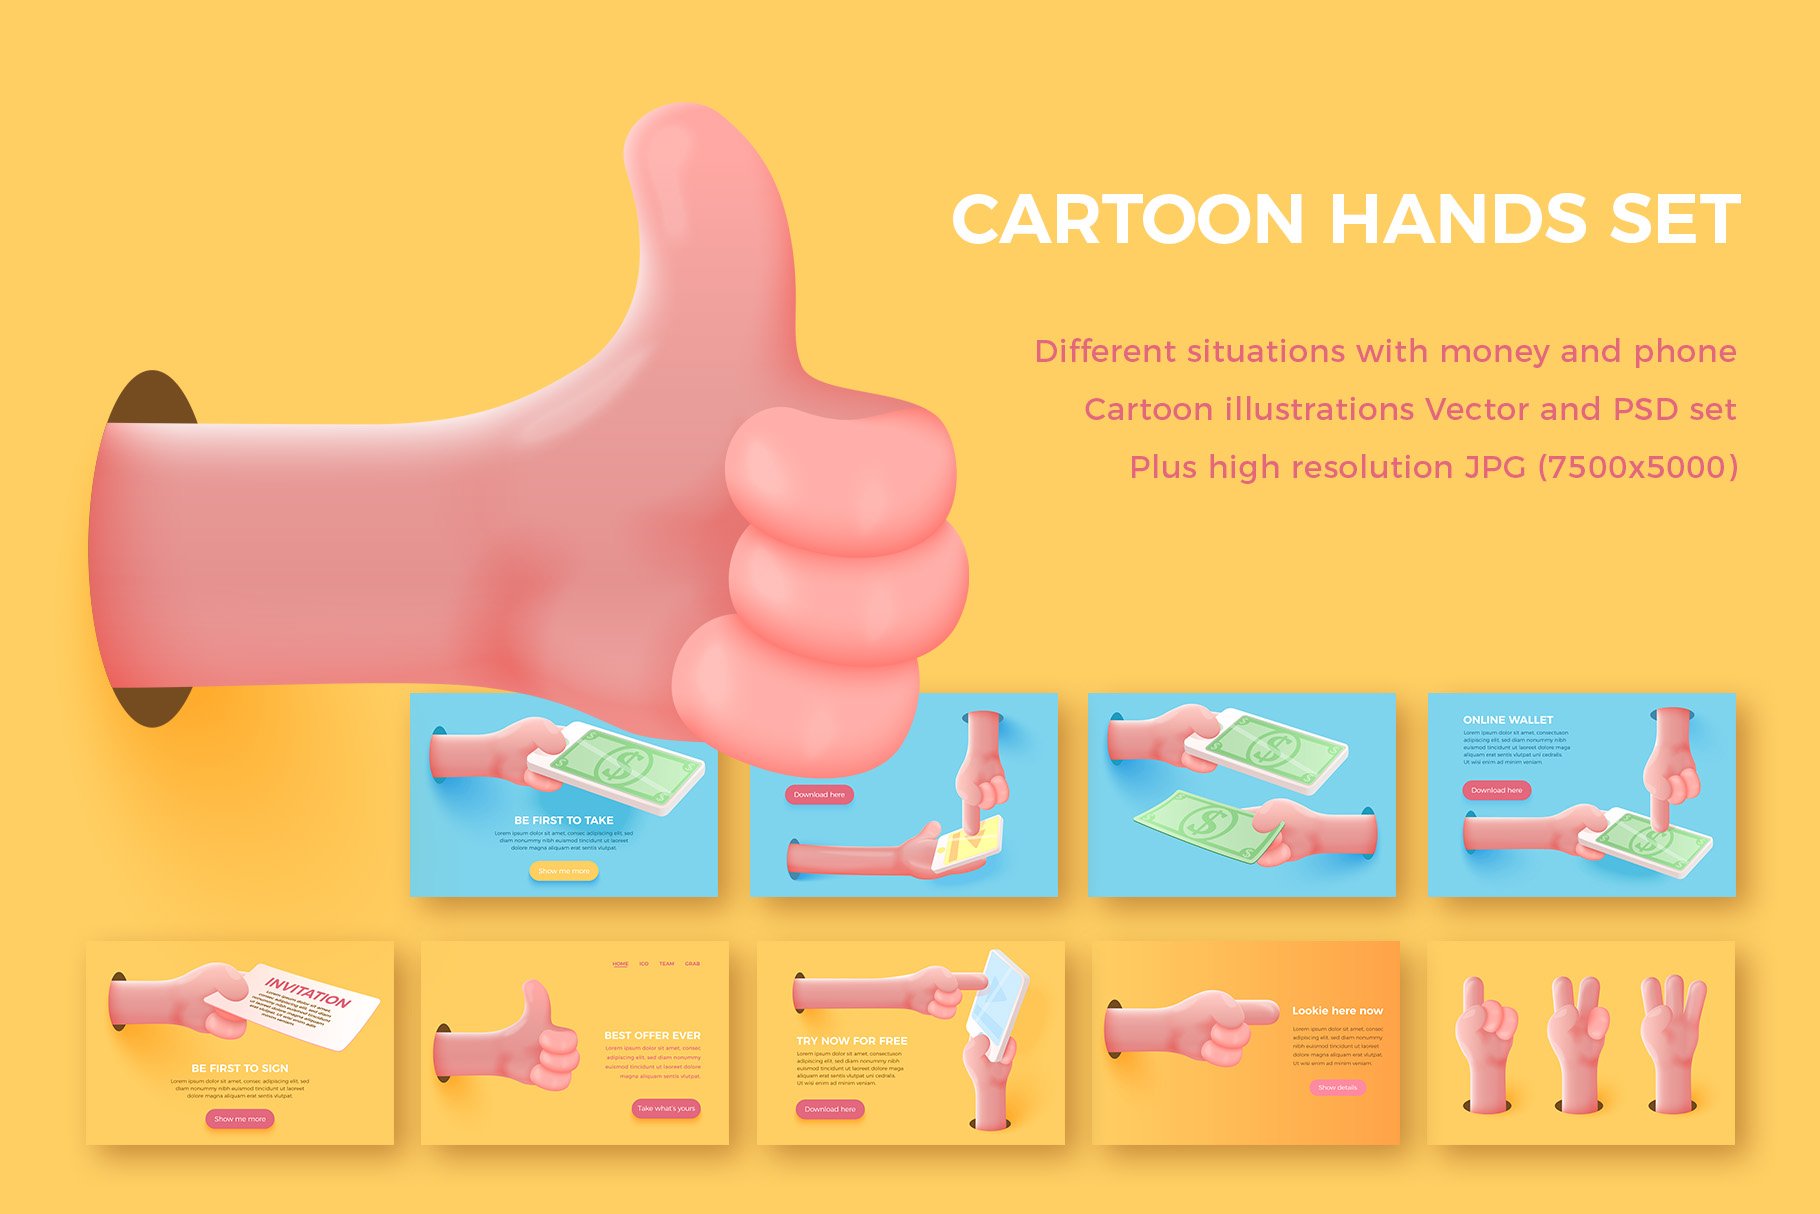 Phone and Dollar cartoon hands set cover image.